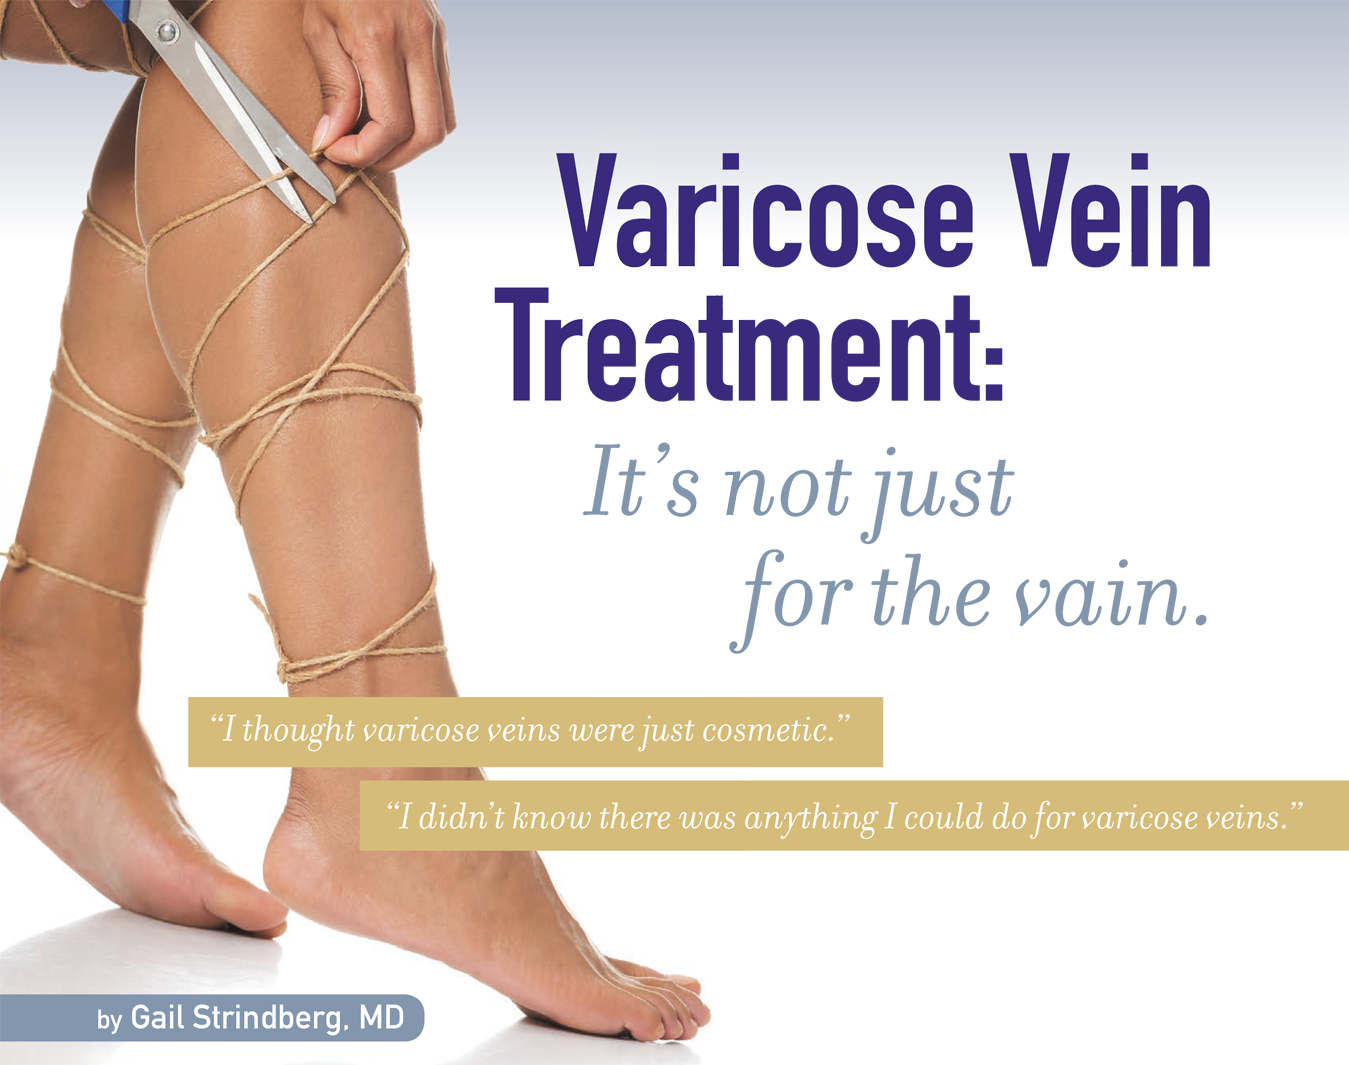 What is the best treatment for varicose veins